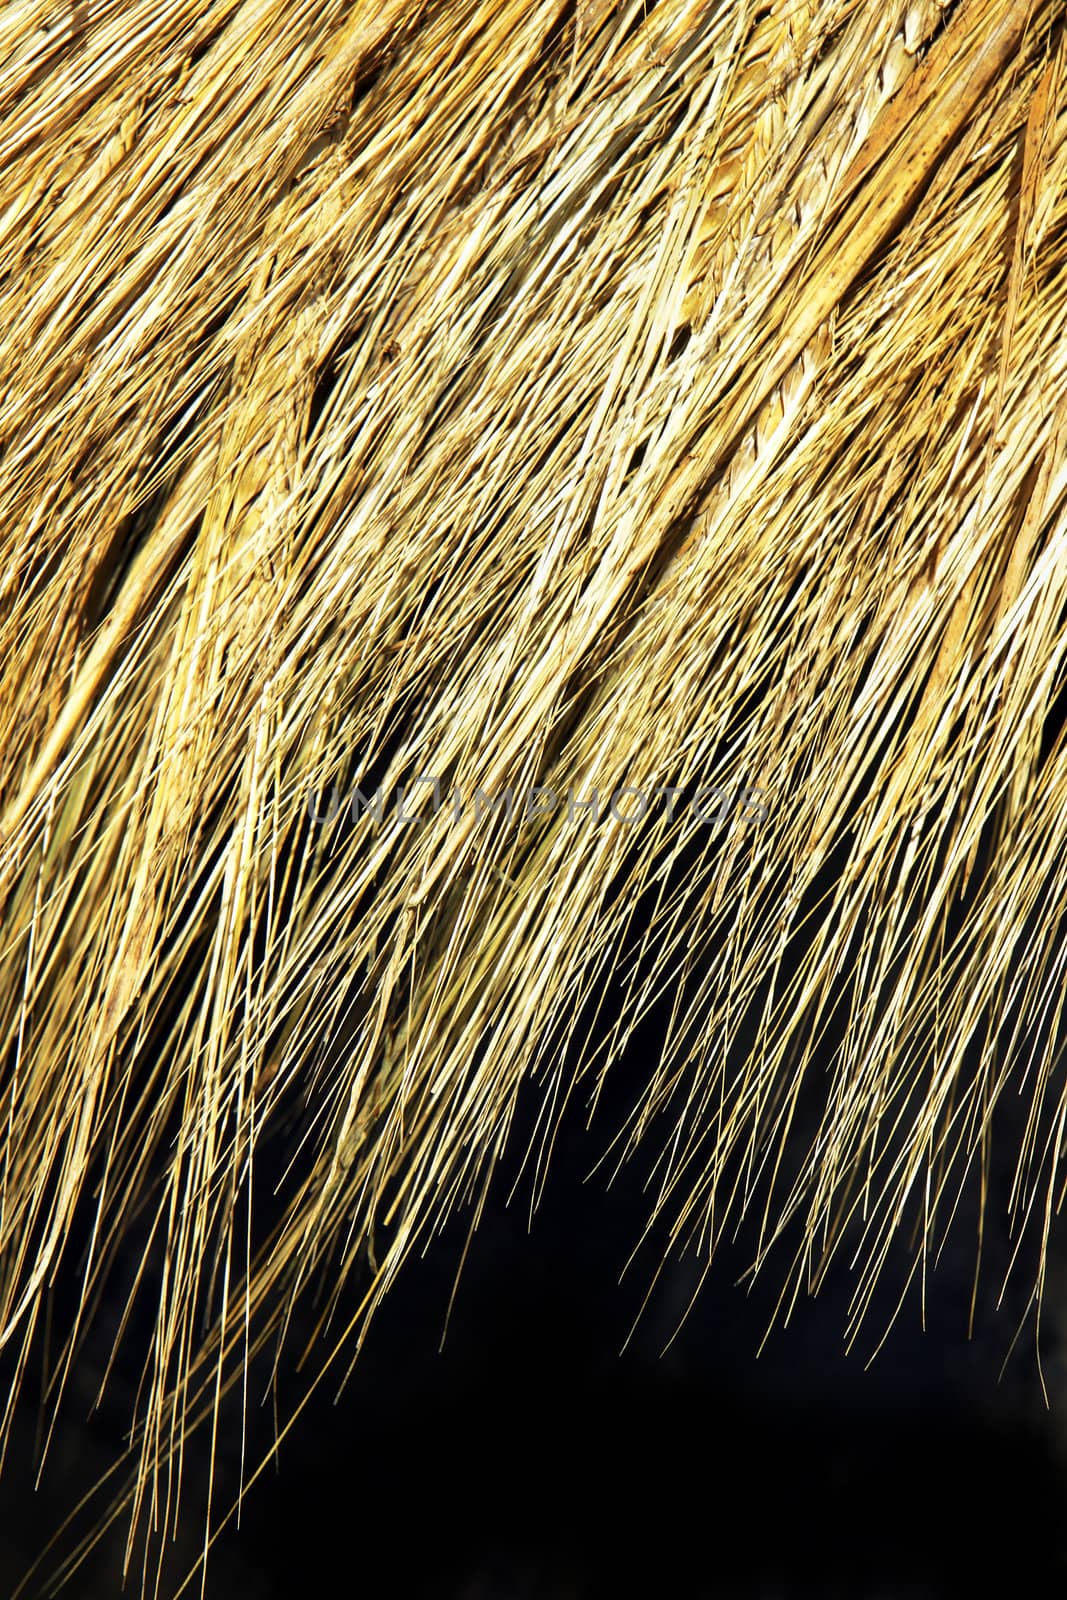 Golden ripe wheat creating great texture background